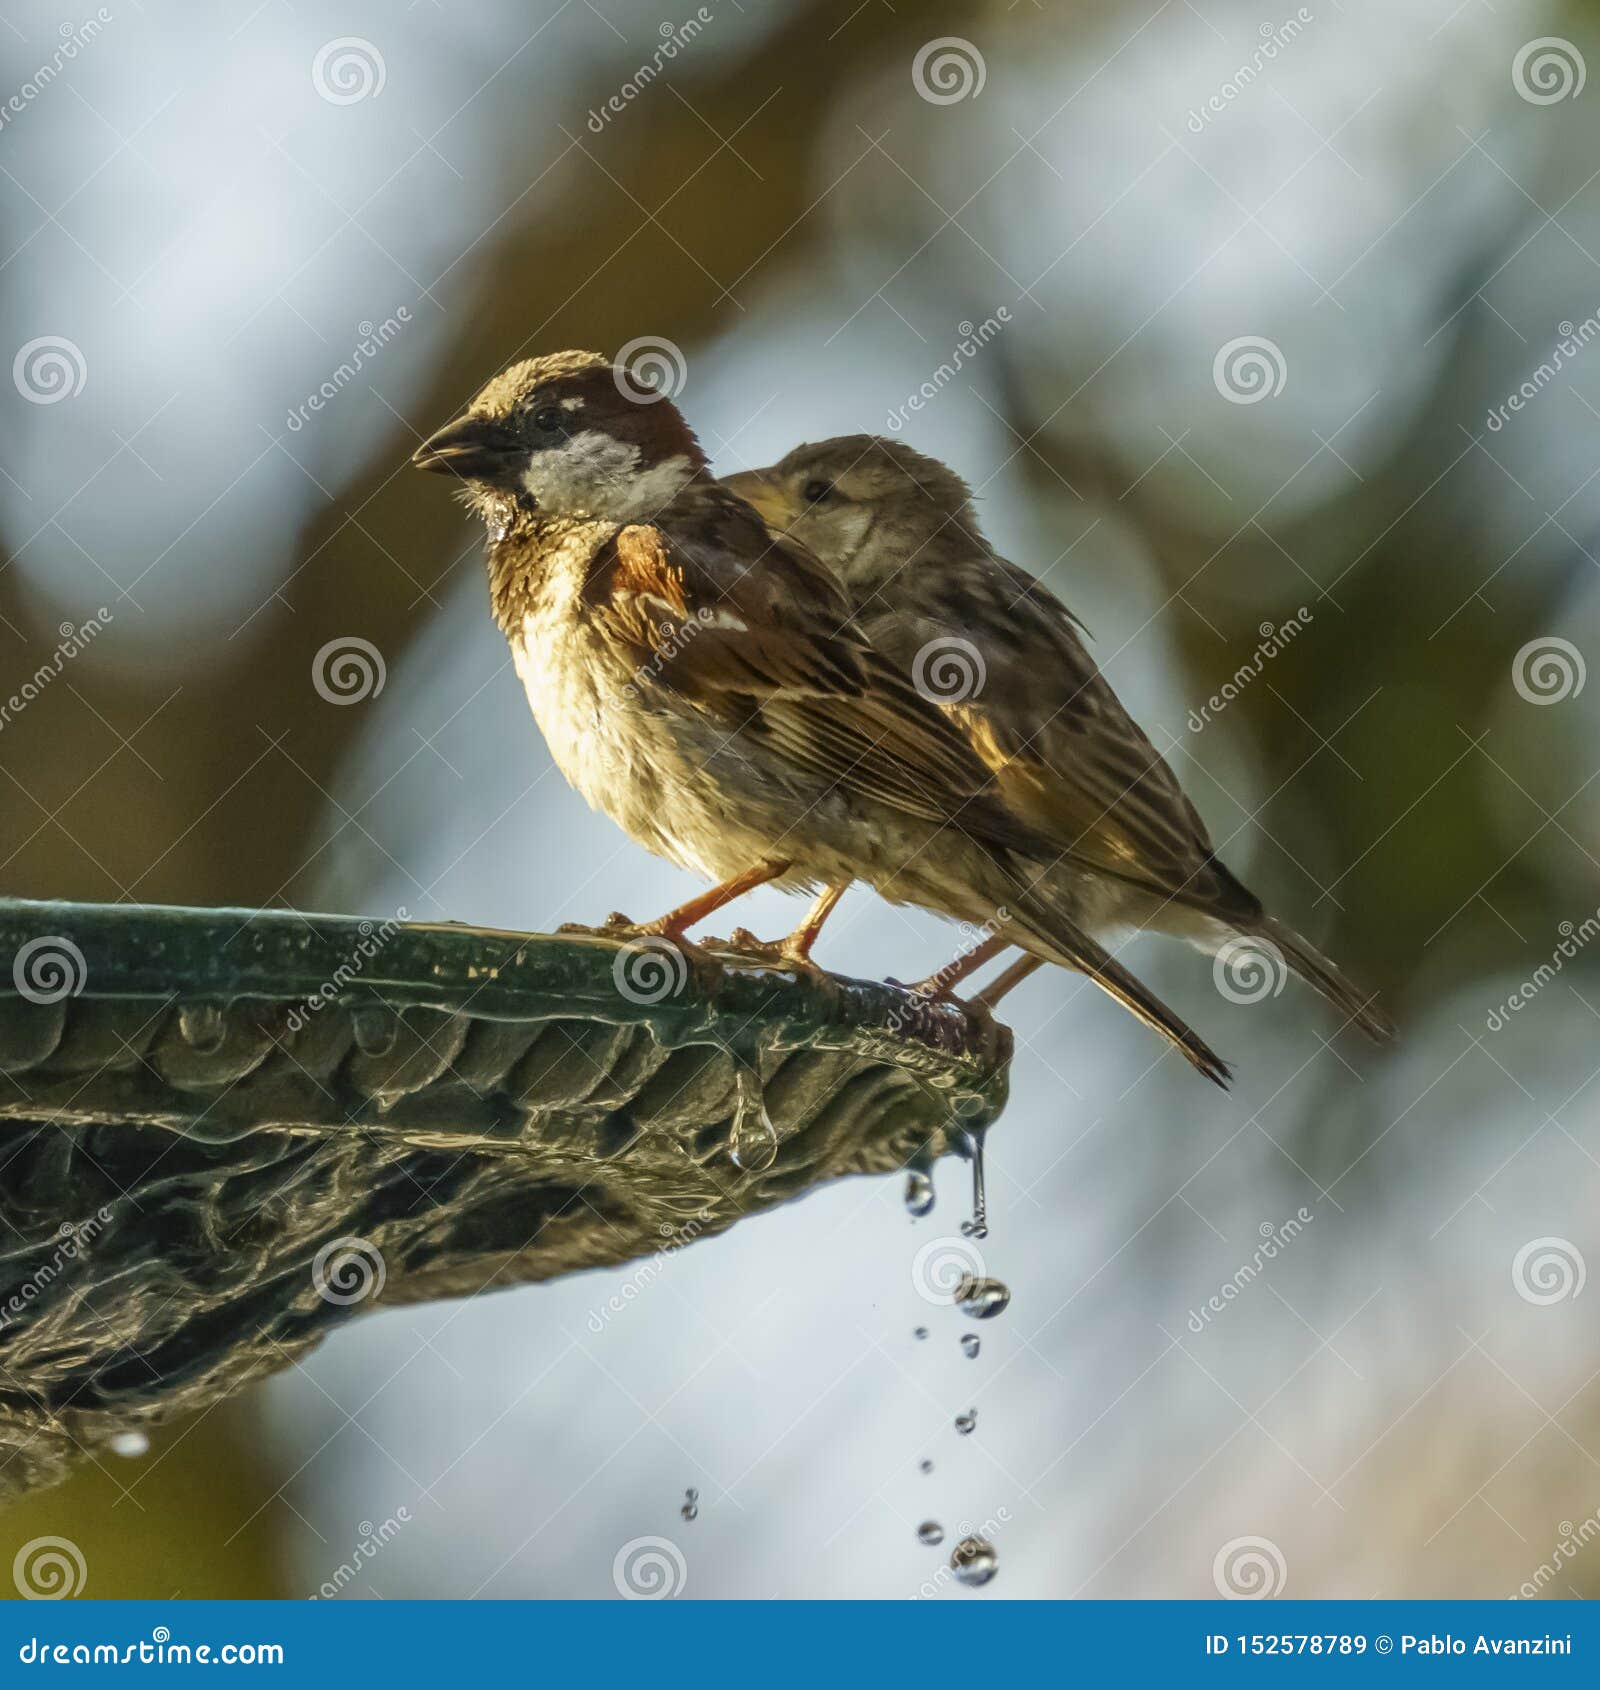 pair of spanish sparrows male and female percched on iron fountain